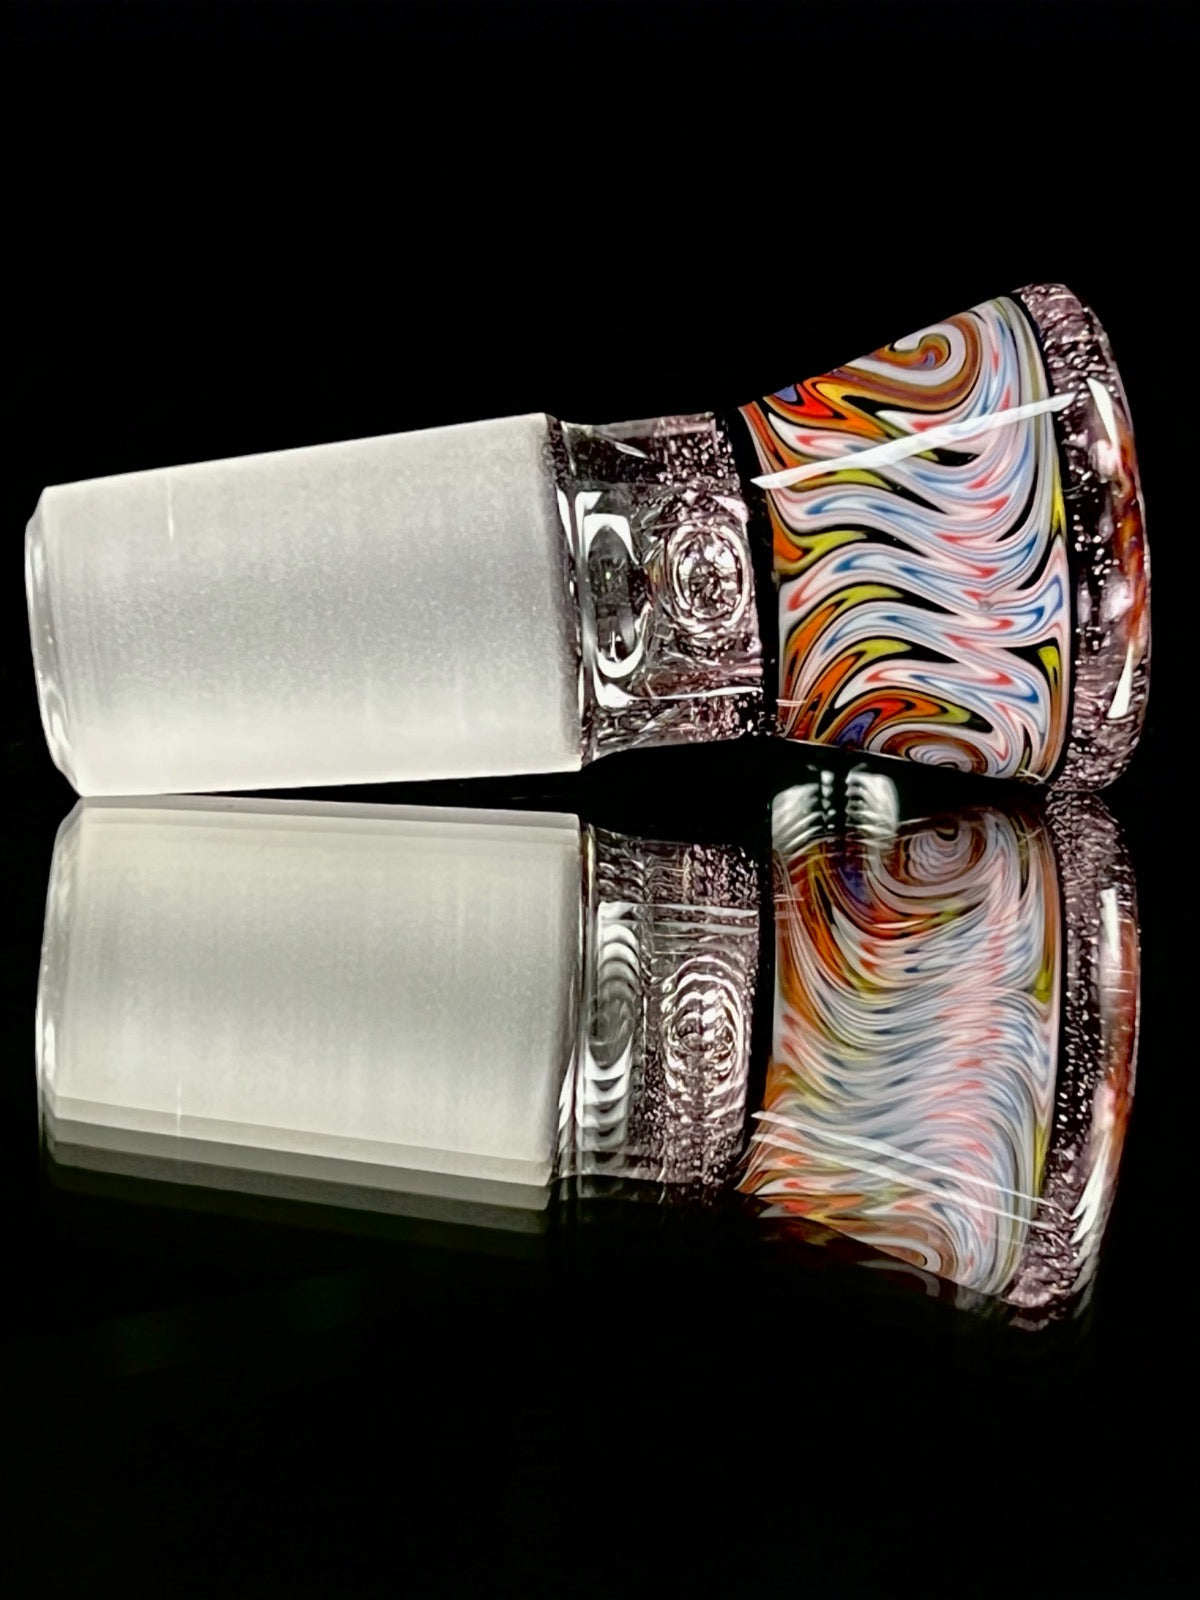 18mm cool pink slide by Mercurius Glass